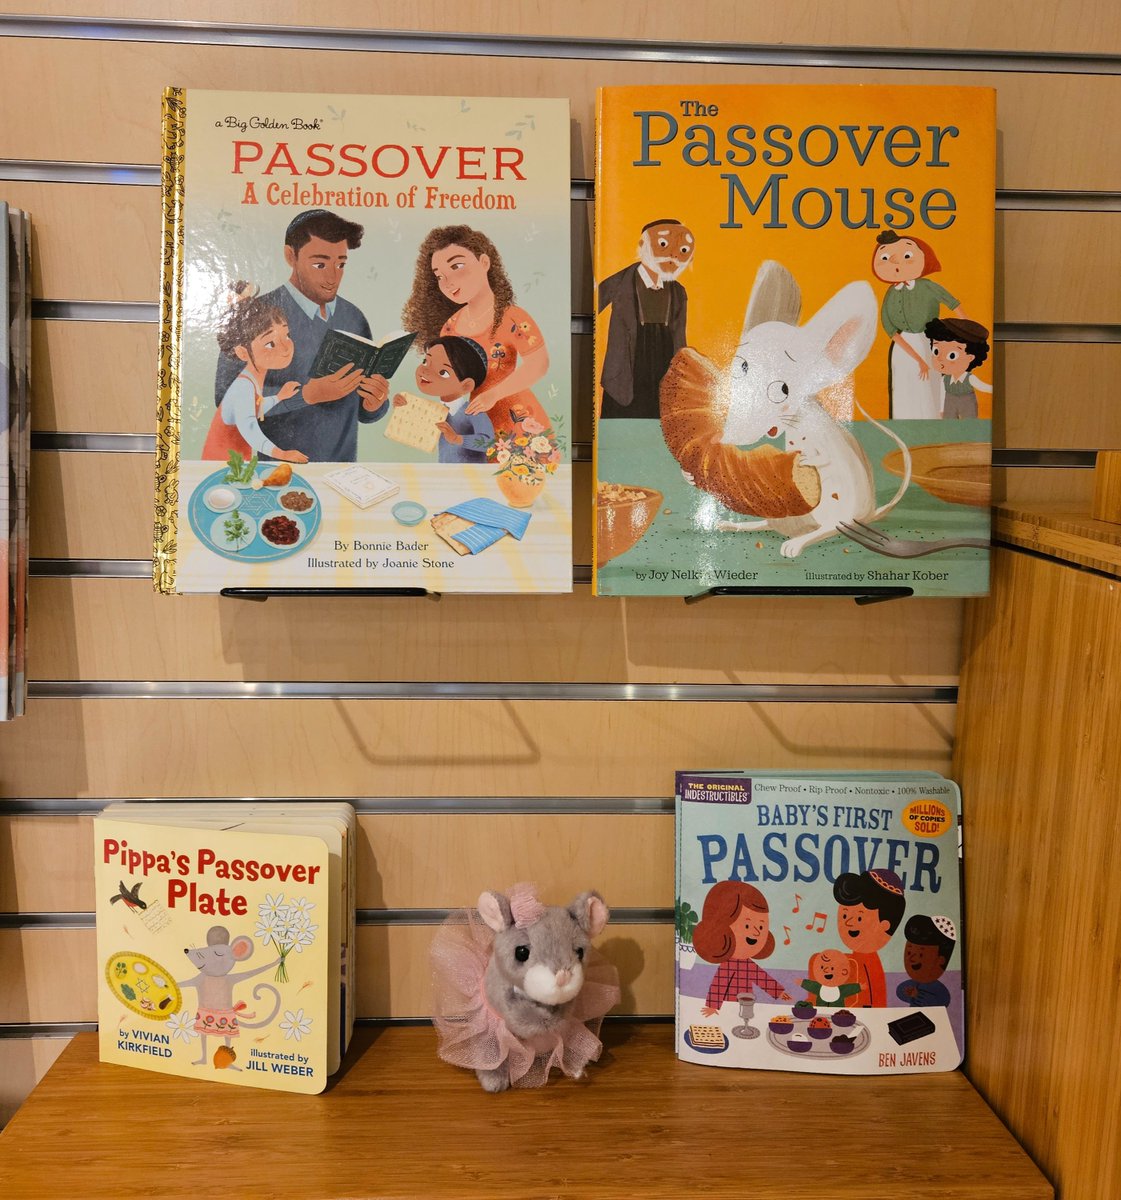 Wishing a happy #Passover to our #Jewish friends! #WhatsUpWednesday #childrensbooks